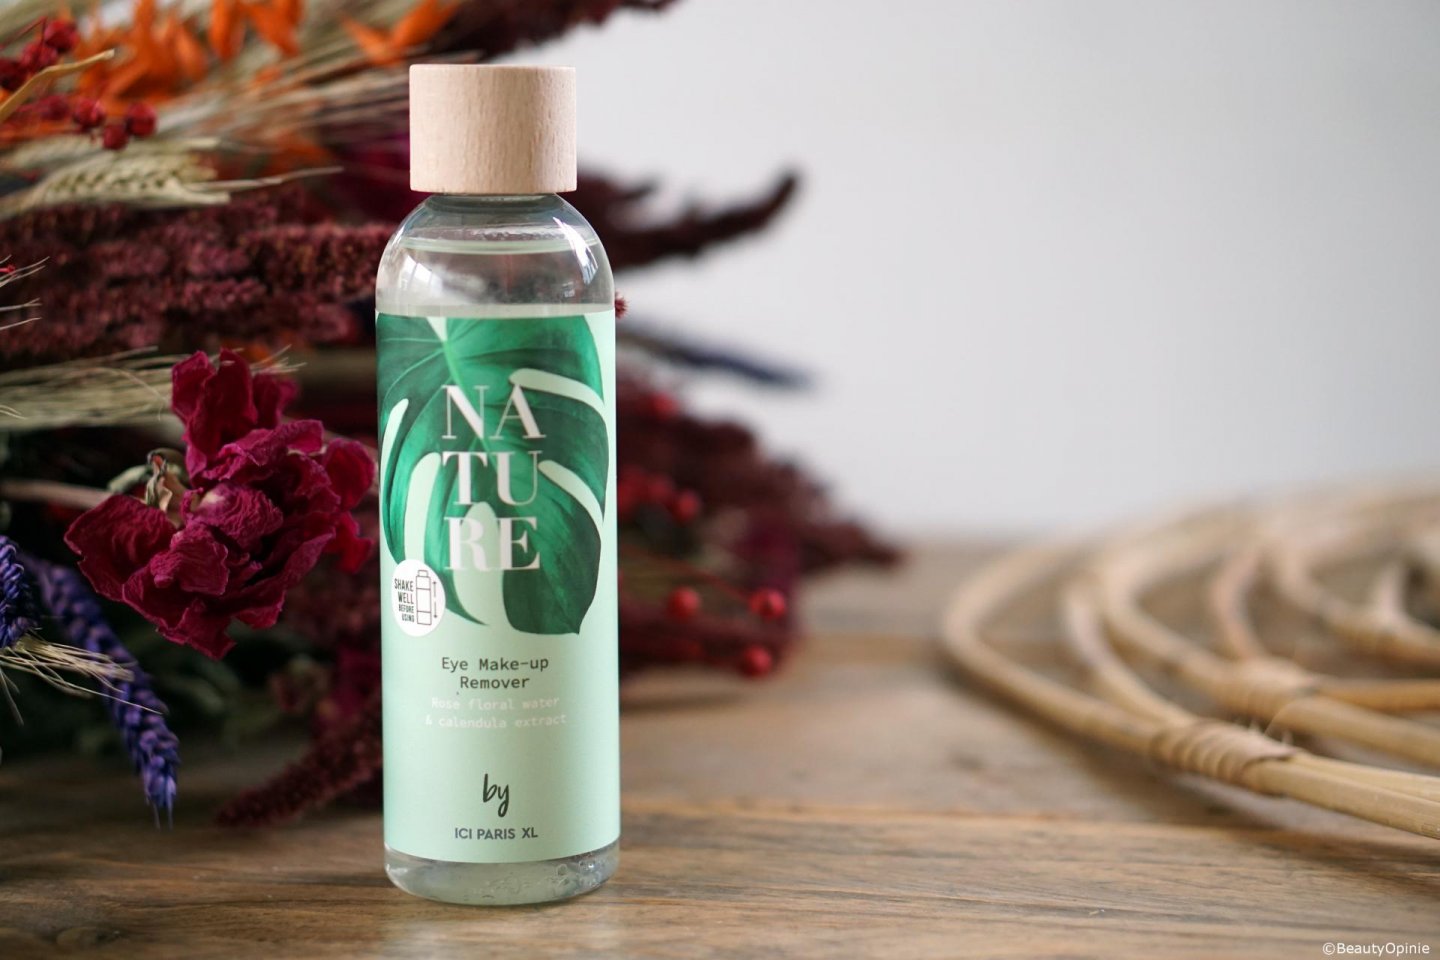 ICI PARIS XL nature eye make-up remover review